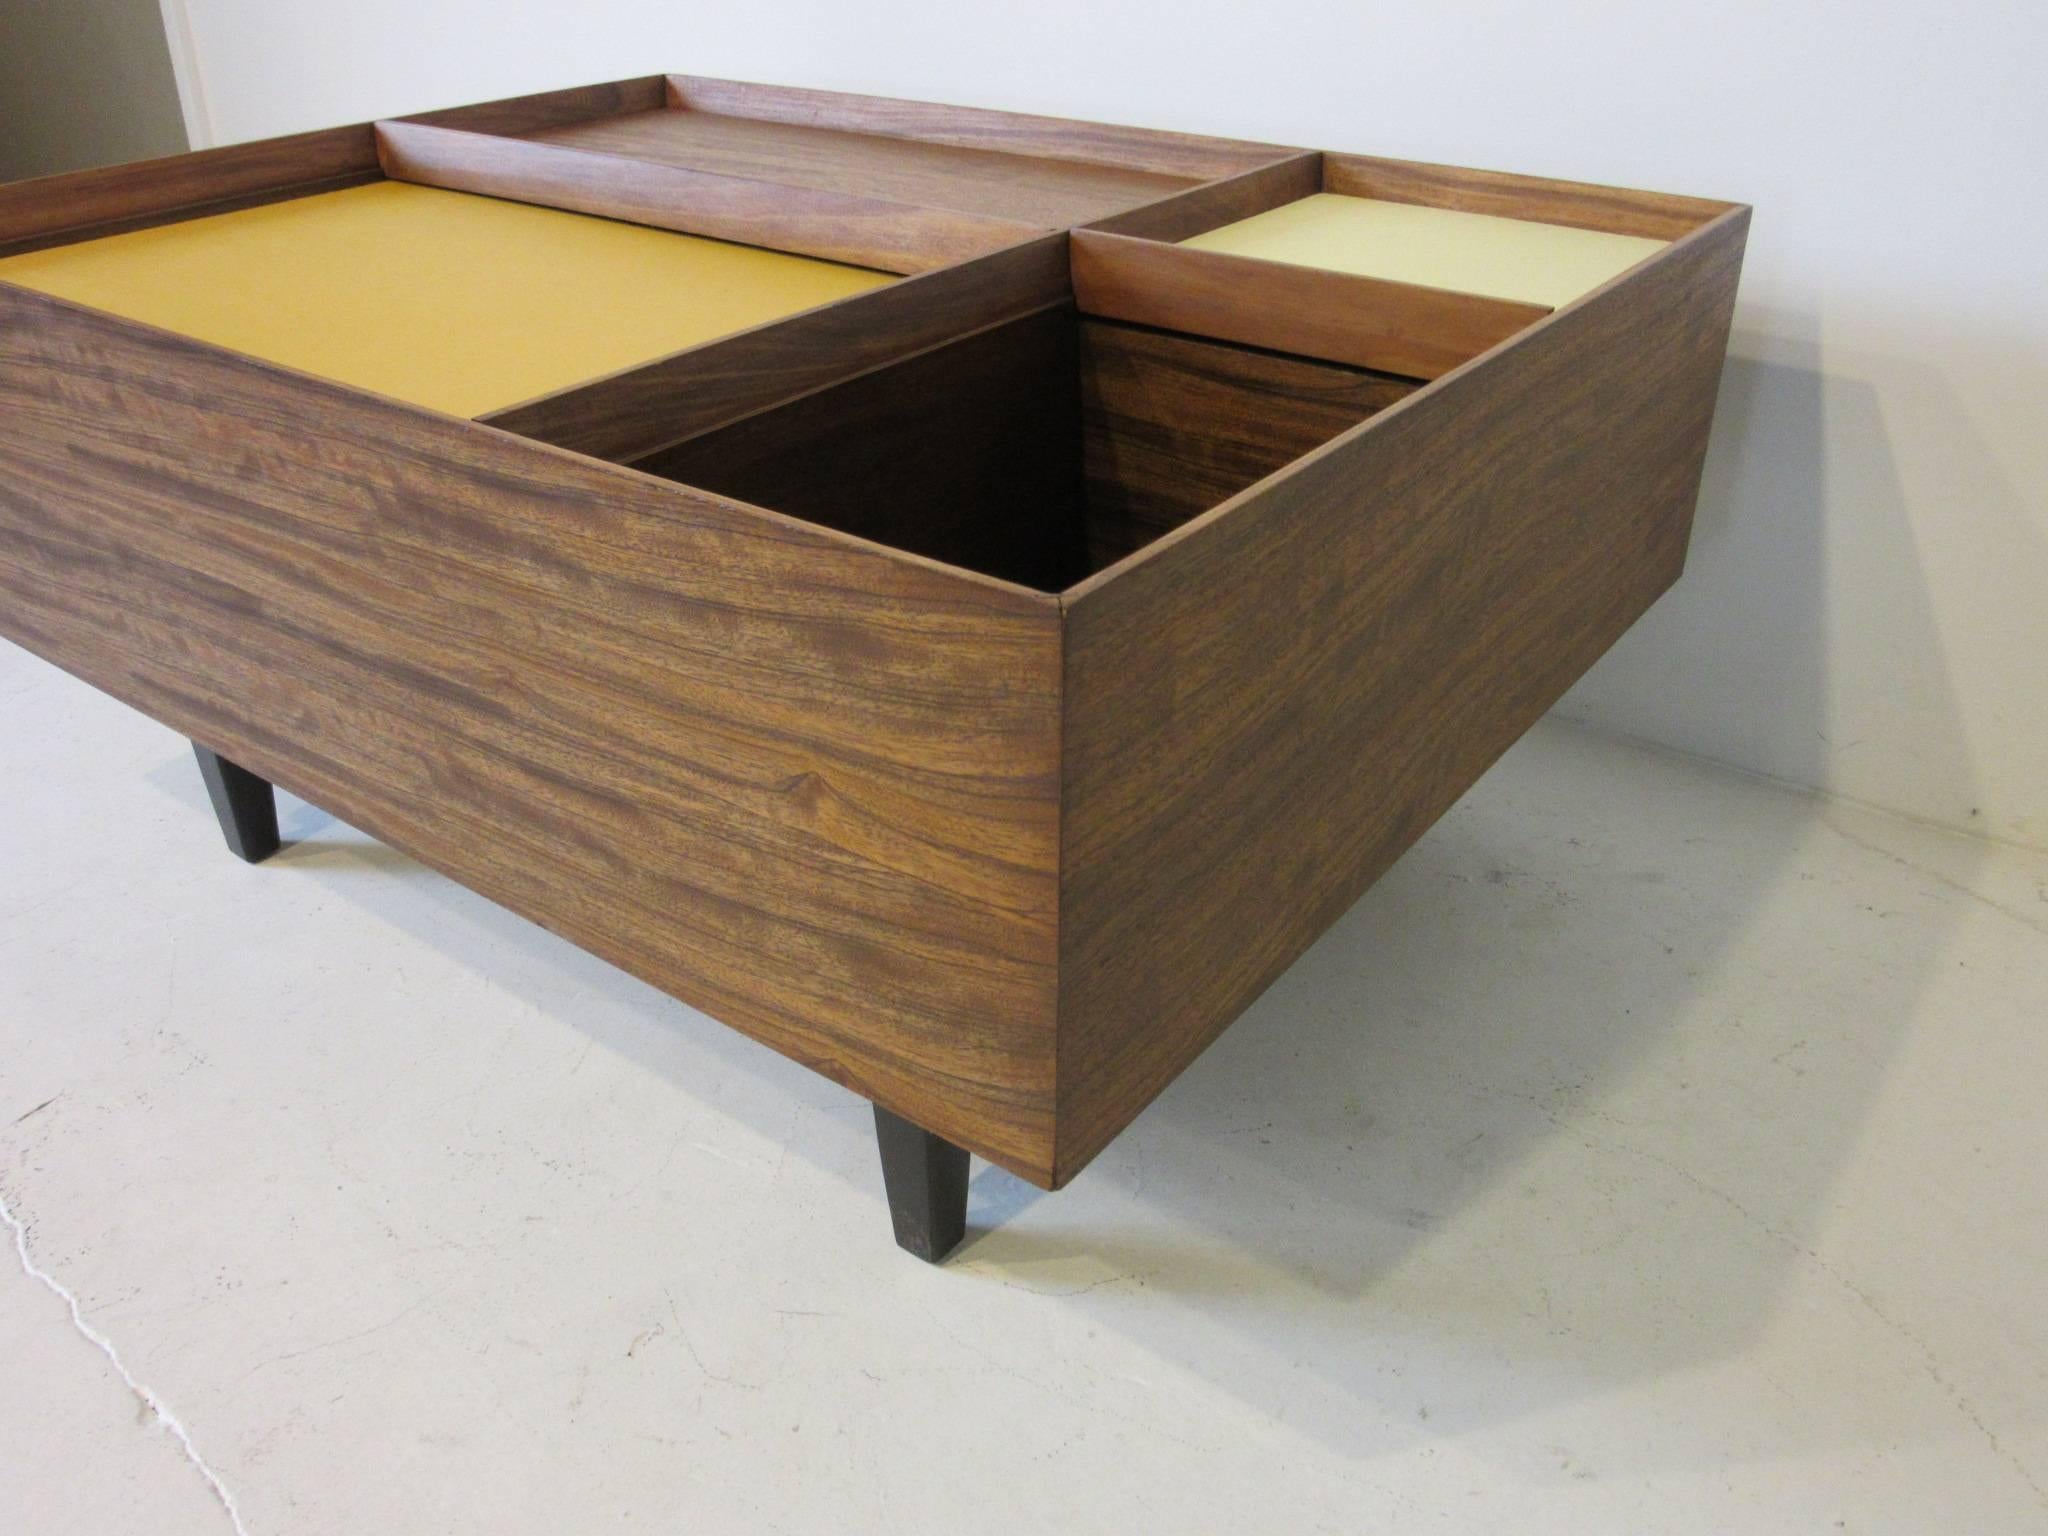 American Early Milo Baughman Coffee Table in Exotic Mindoro Wood for Drexel